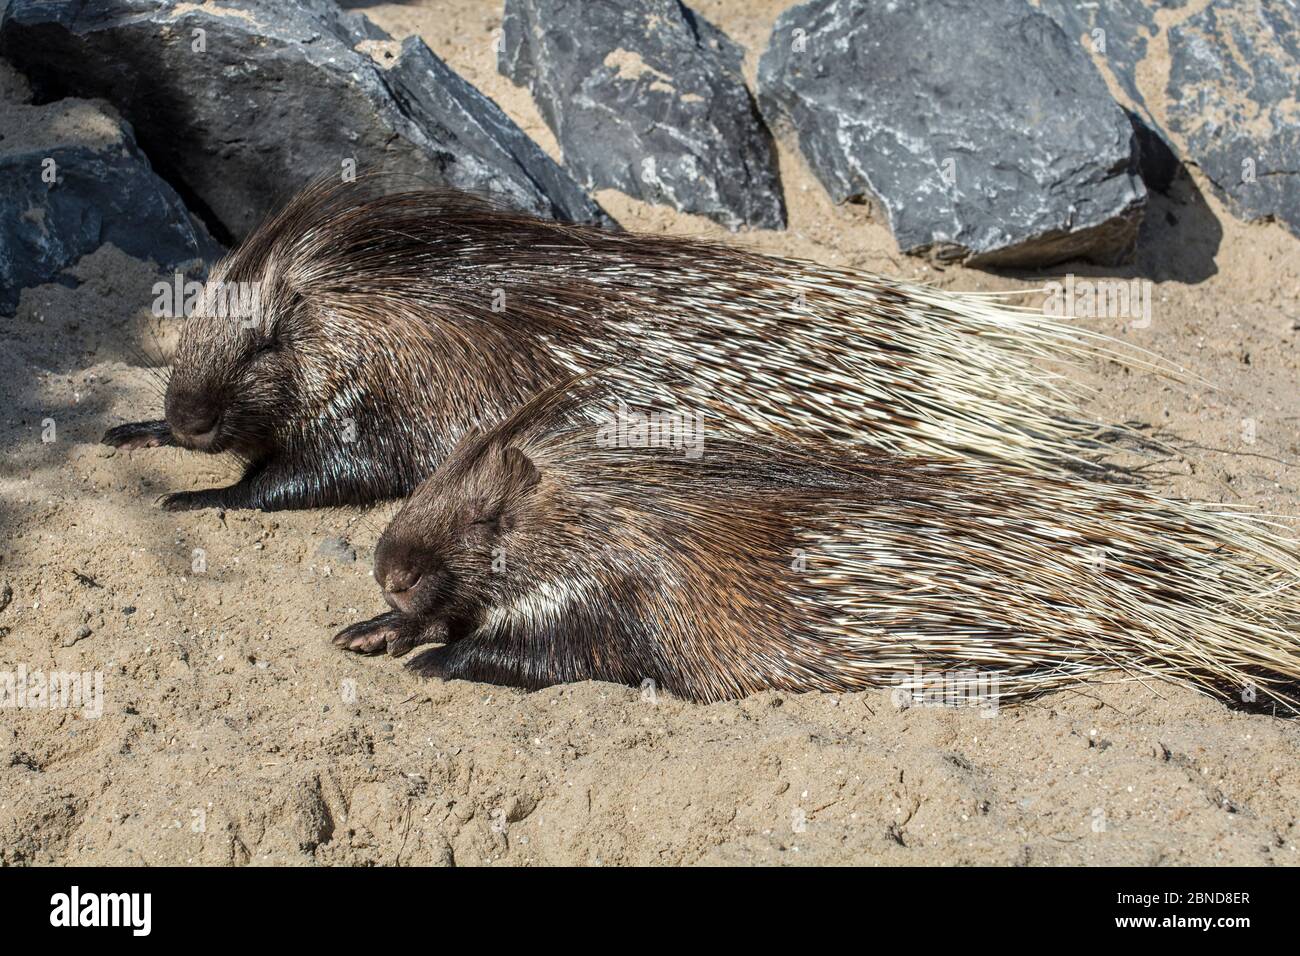 Two Indian crested porcupines (Hystrix indica) resting, captive, native to southern Asia and the Middle East. Stock Photo